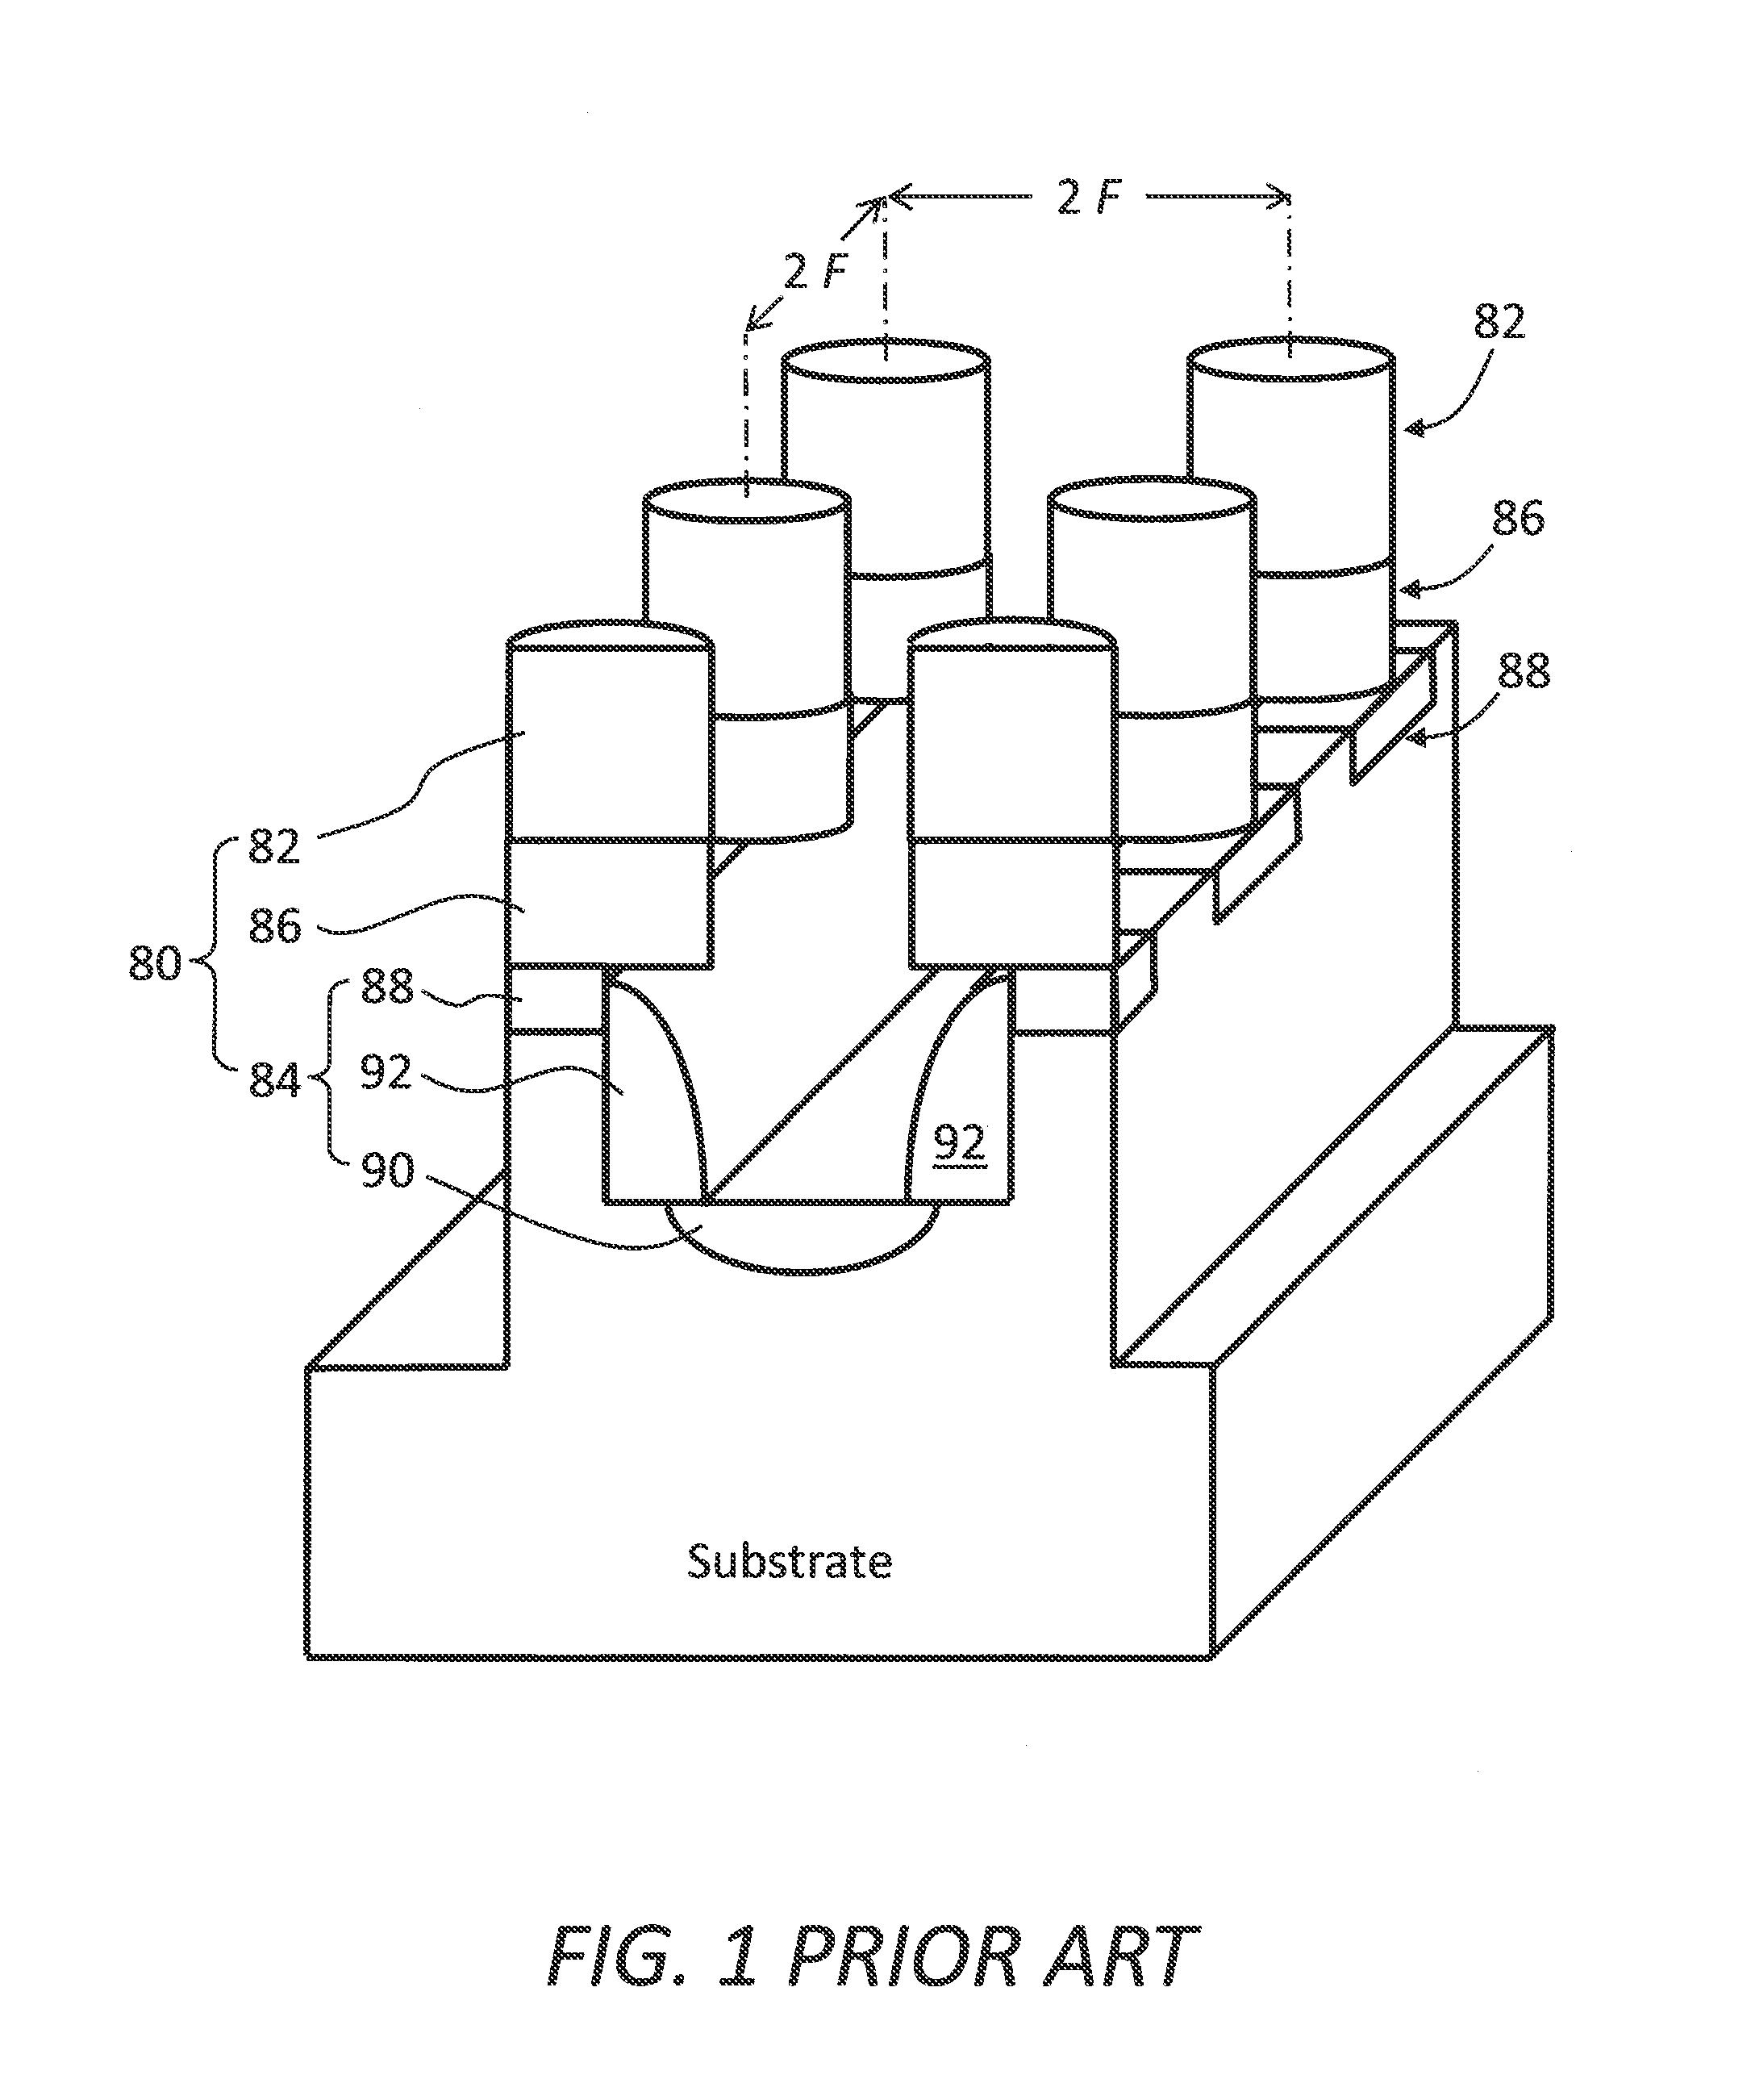 Memory device having stitched arrays of 4 F2 memory cells